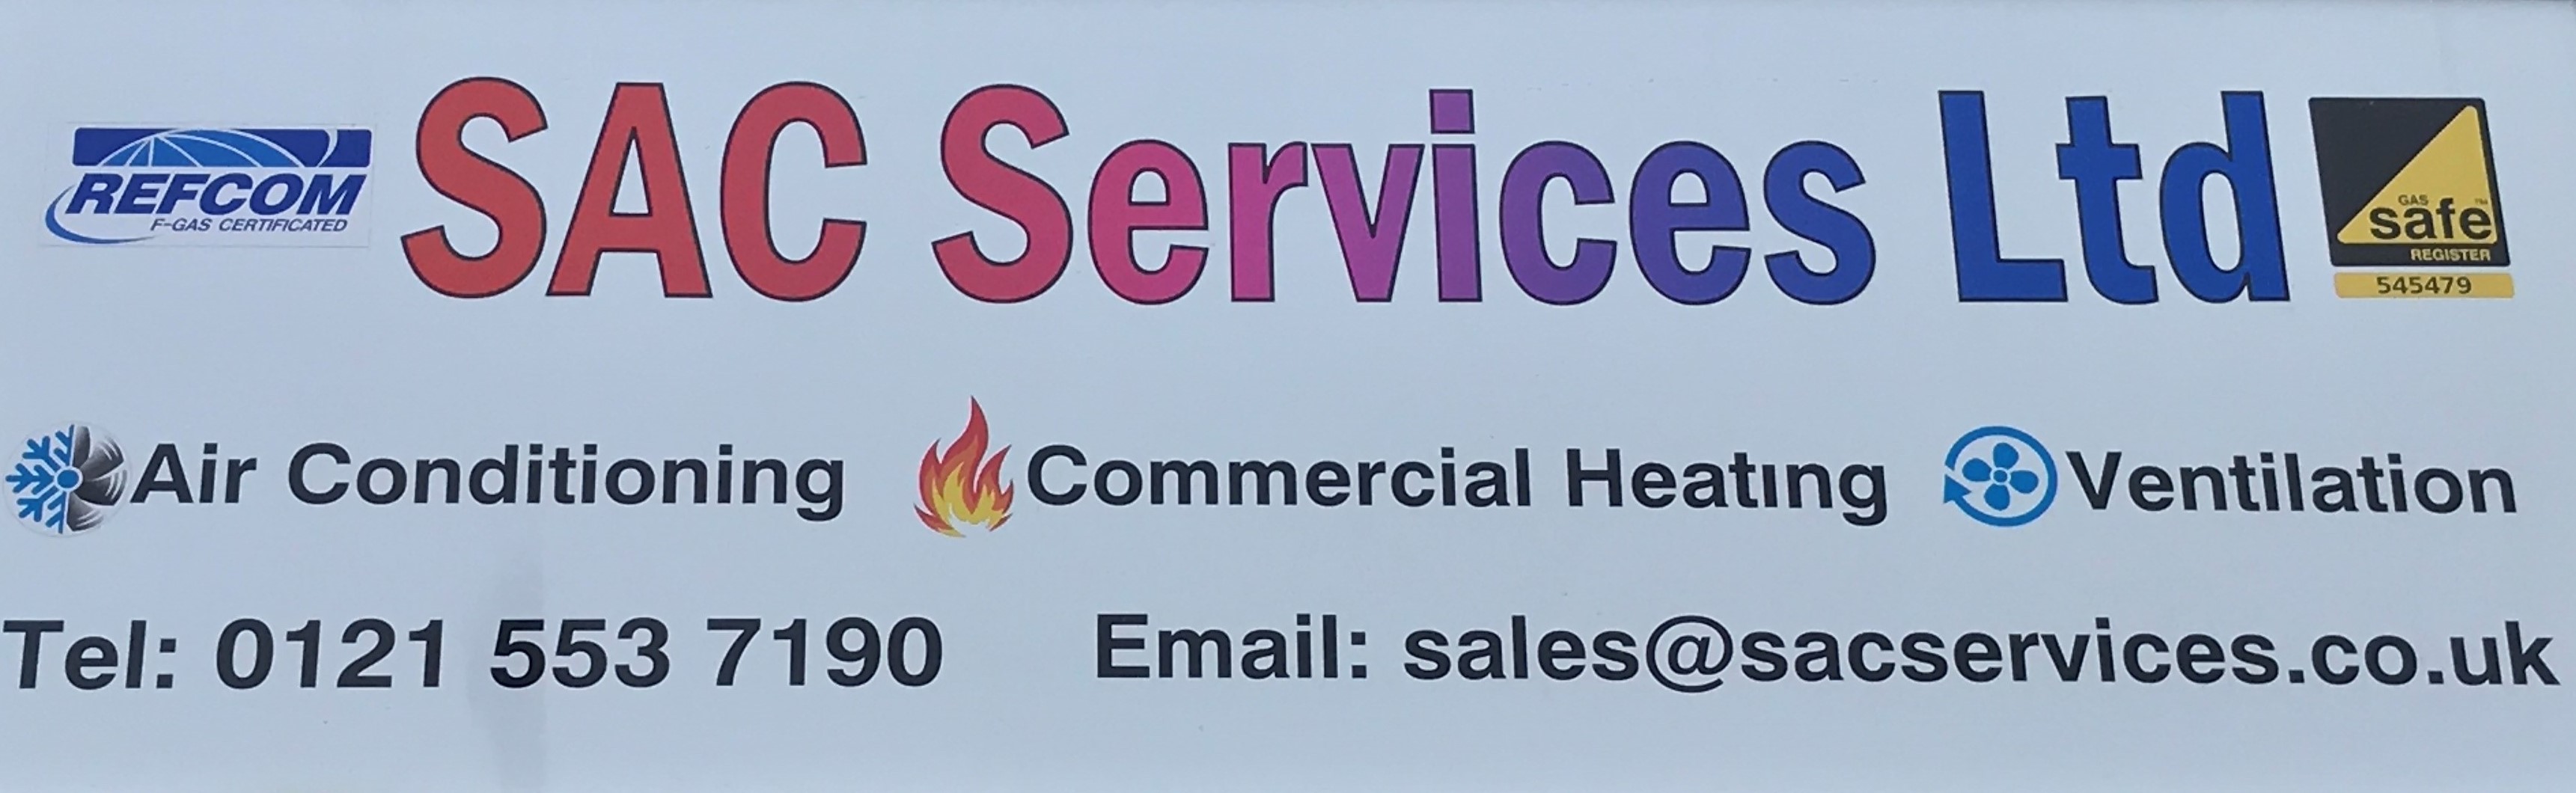 Logo of SAC Services Ltd Air Conditioning And Refrigeration Contractors In West Bromwich, West Midlands